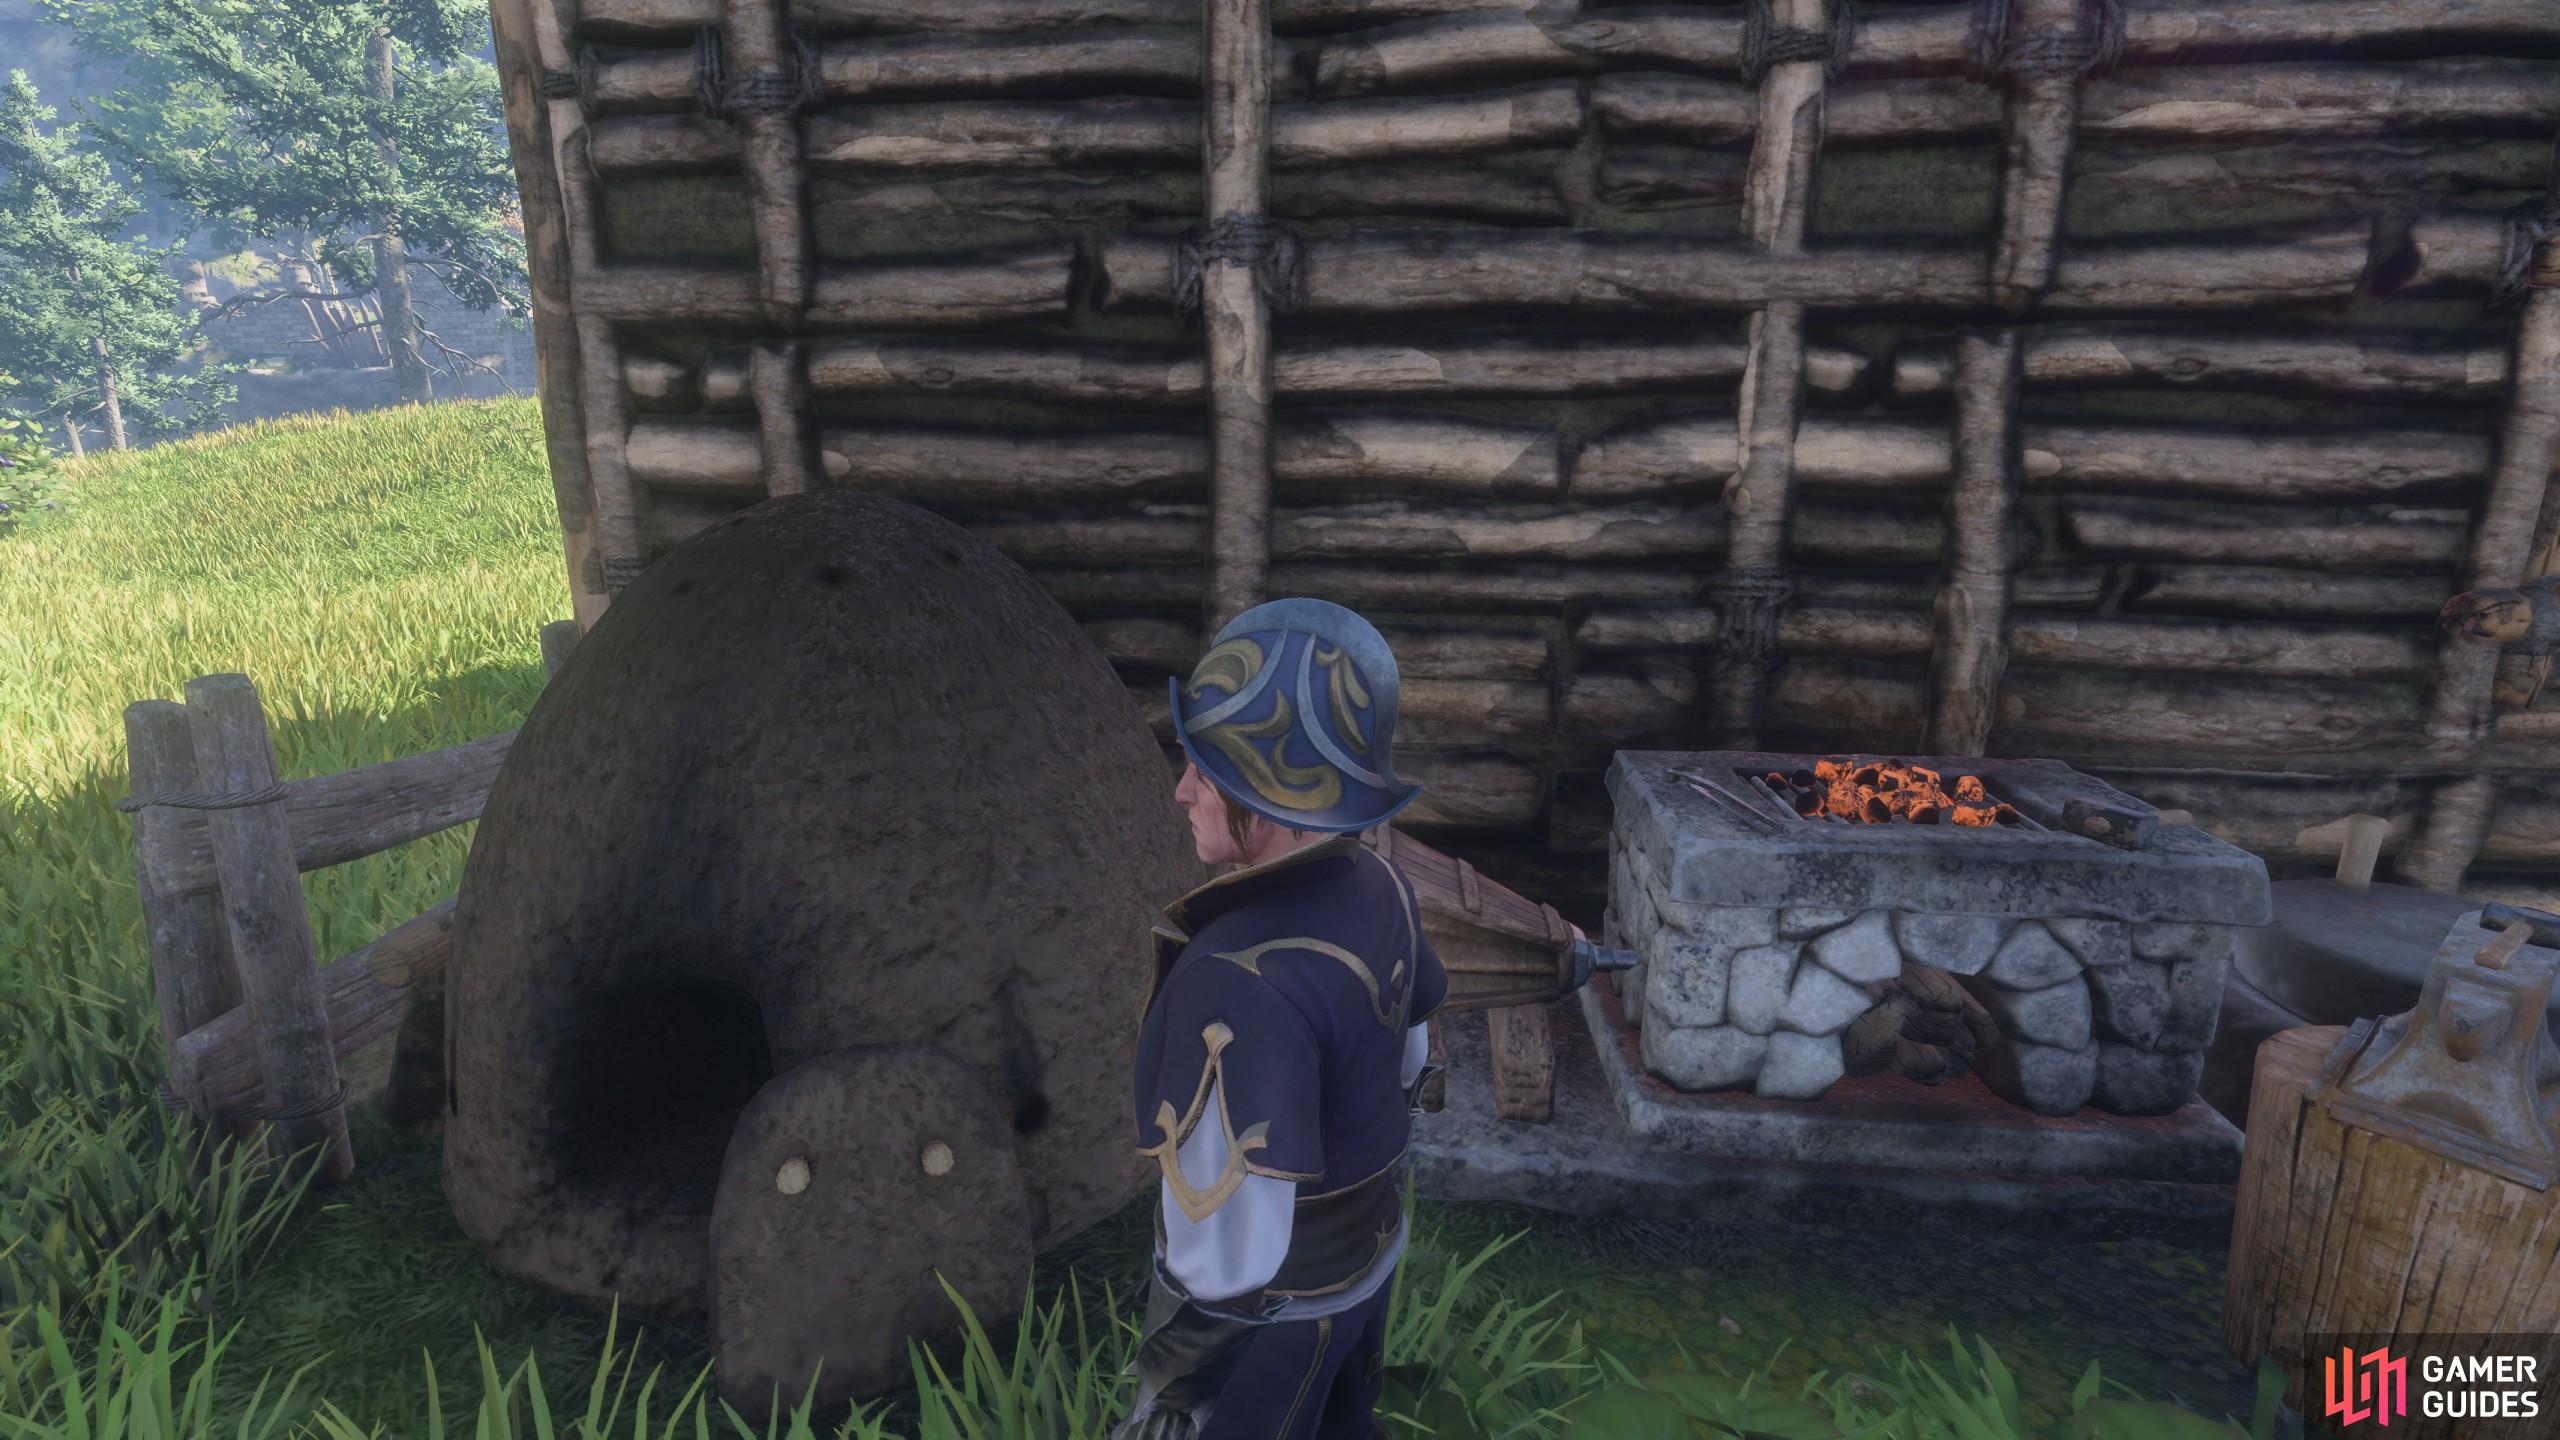 This guide will teach you how to get Charcoal in Enshrouded.